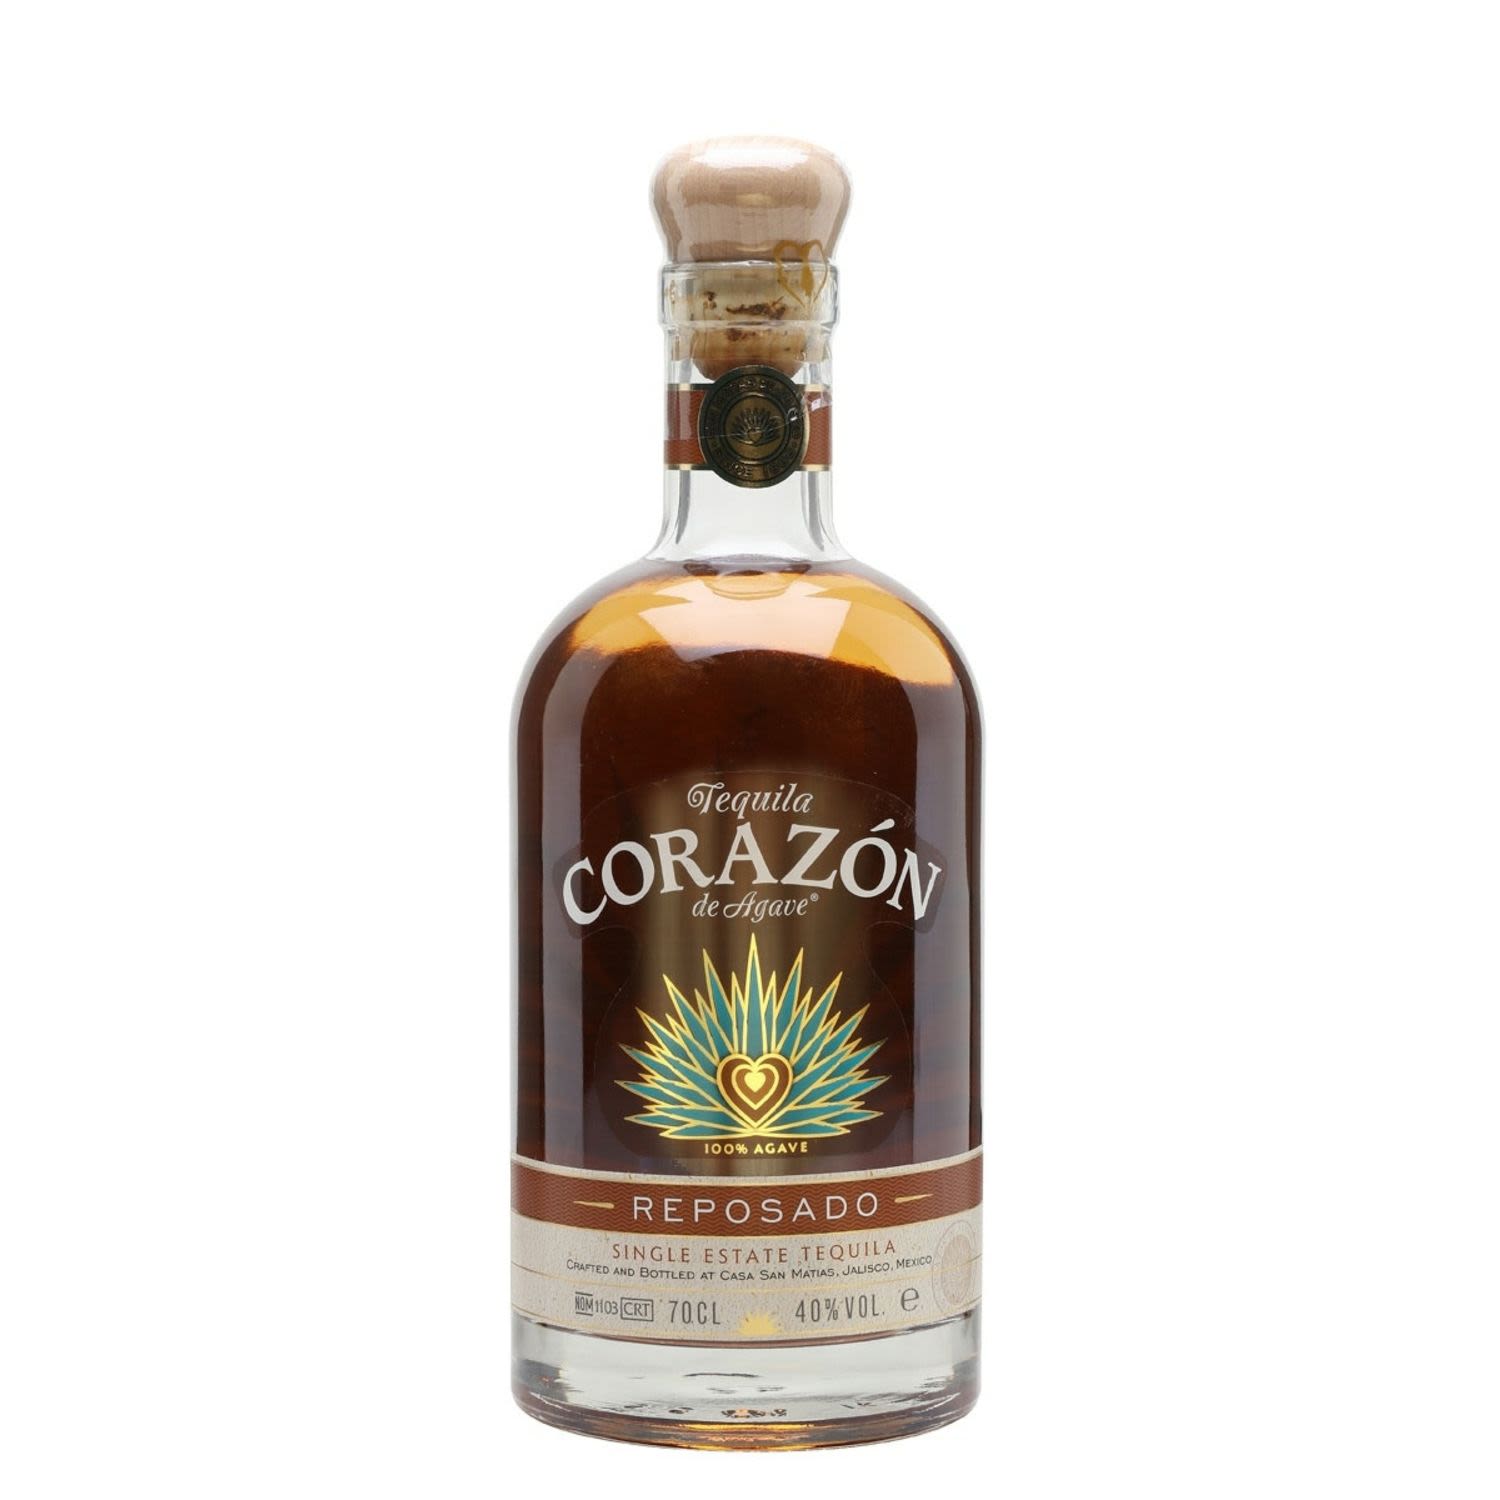 Vanilla and agave, delicate notes of oak backed with plenty of green fruit and a dry almond scented finish.<br /> <br />Alcohol Volume: 40.00%<br /><br />Pack Format: Bottle<br /><br />Standard Drinks: 22.1</br /><br />Pack Type: Bottle<br />